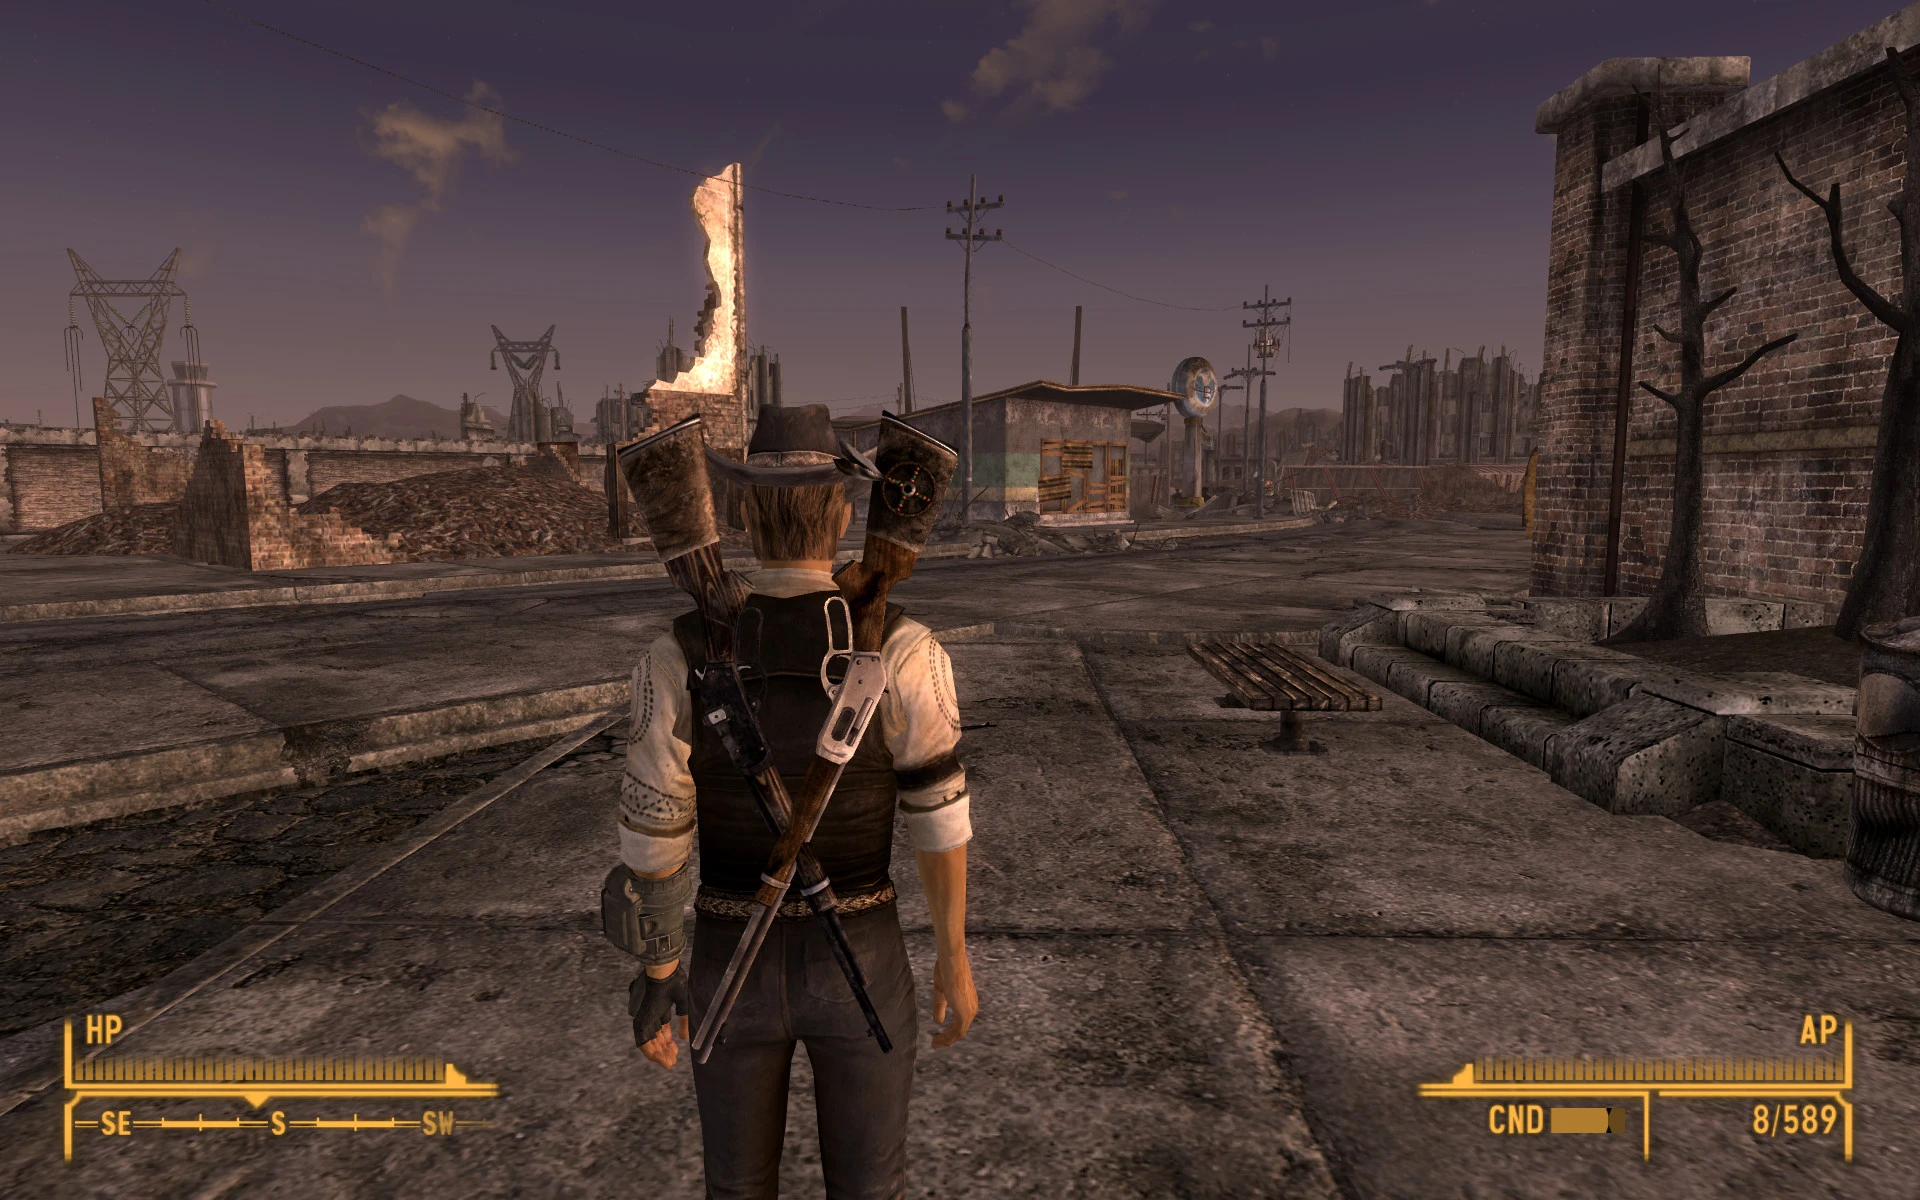 holster weapon in fallout new vegas pc